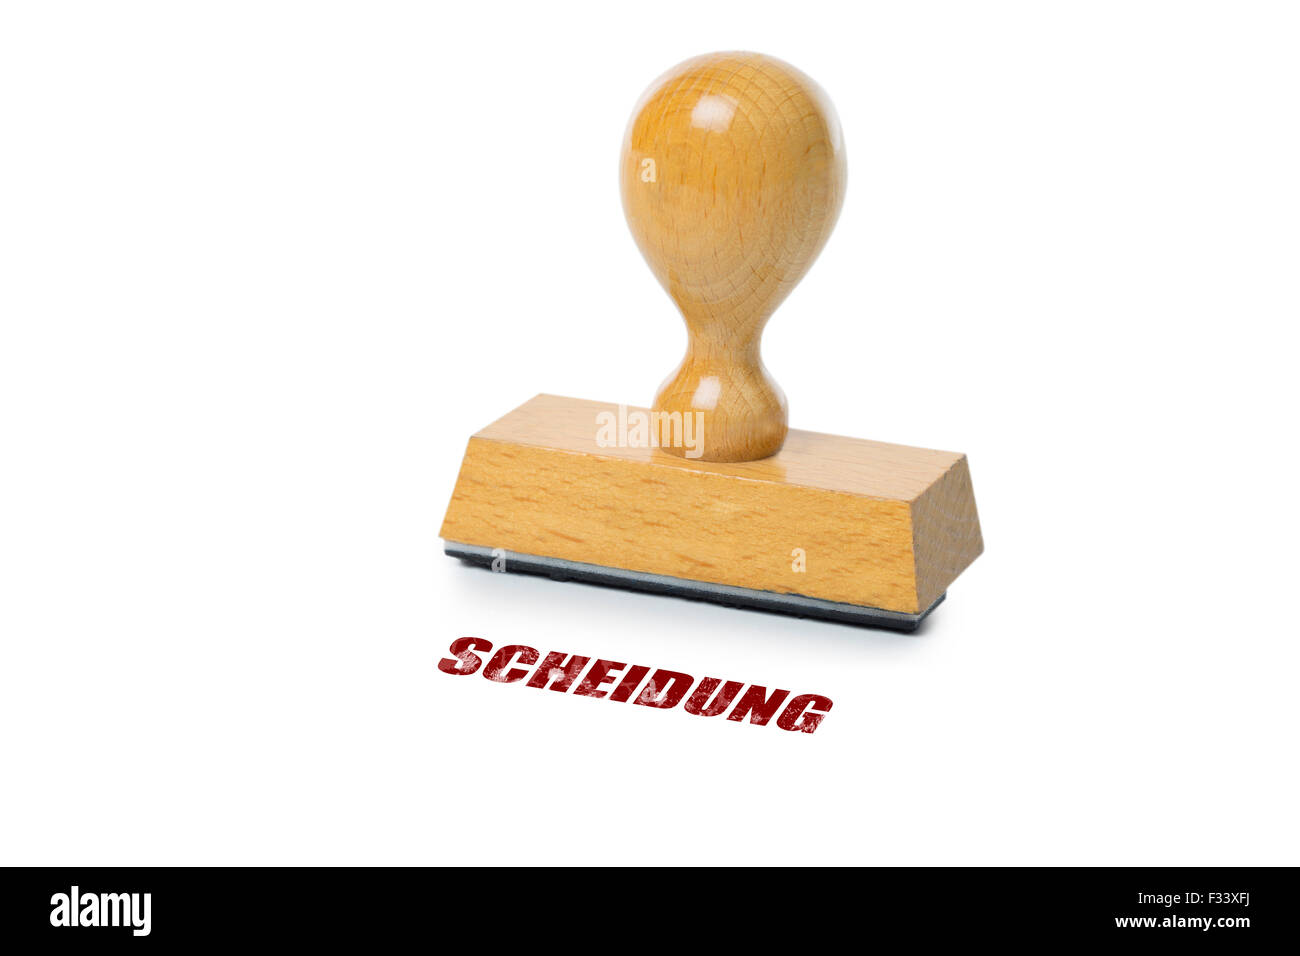 Scheidung (German Divorce) printed in red ink with wooden Rubber stamp isolated on white background Stock Photo